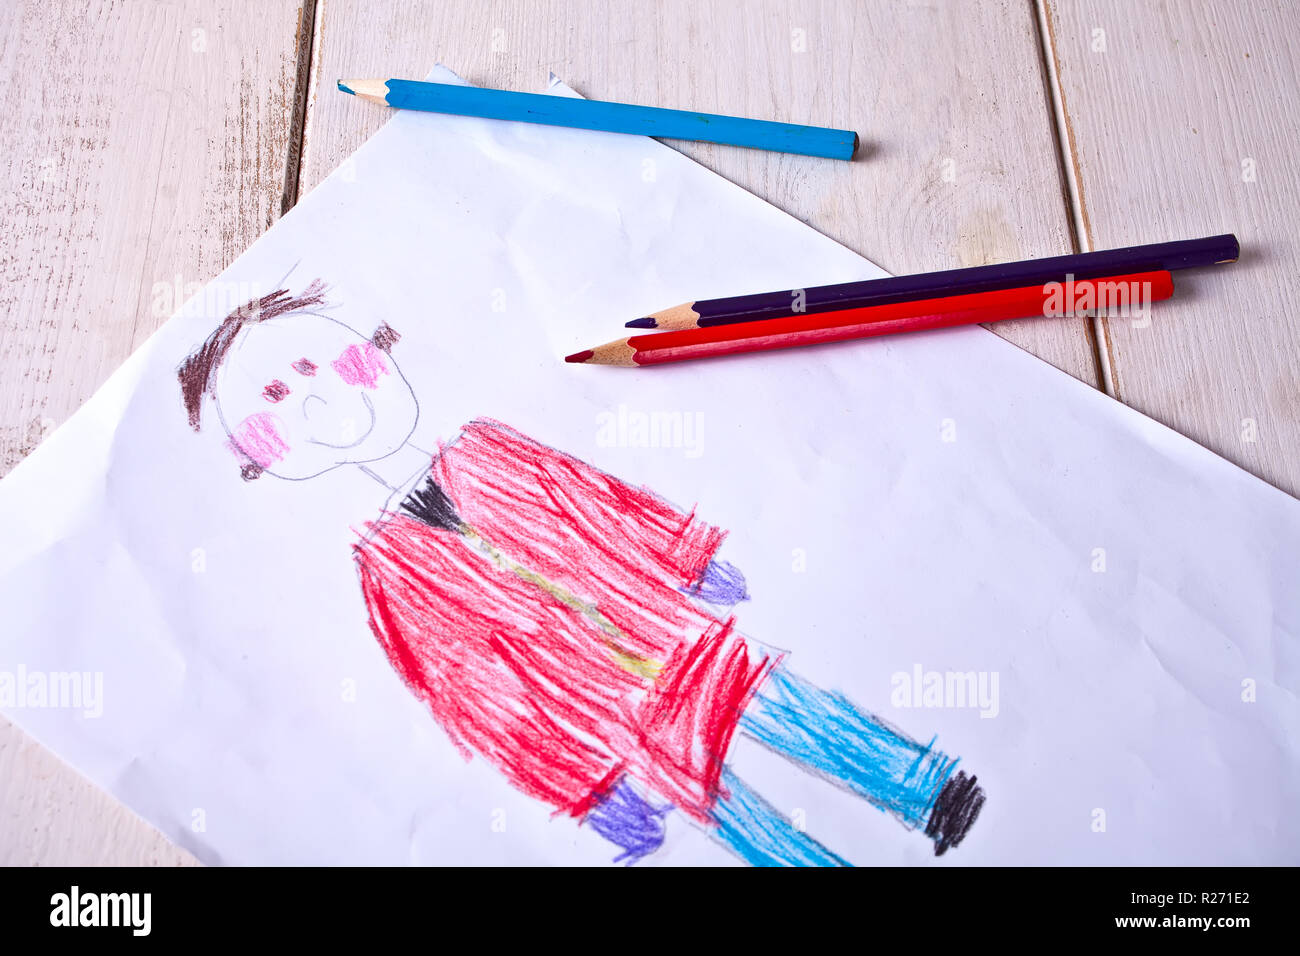 Kids Drawing On White Sheet Of Paper, Closeup Stock Photo, Picture